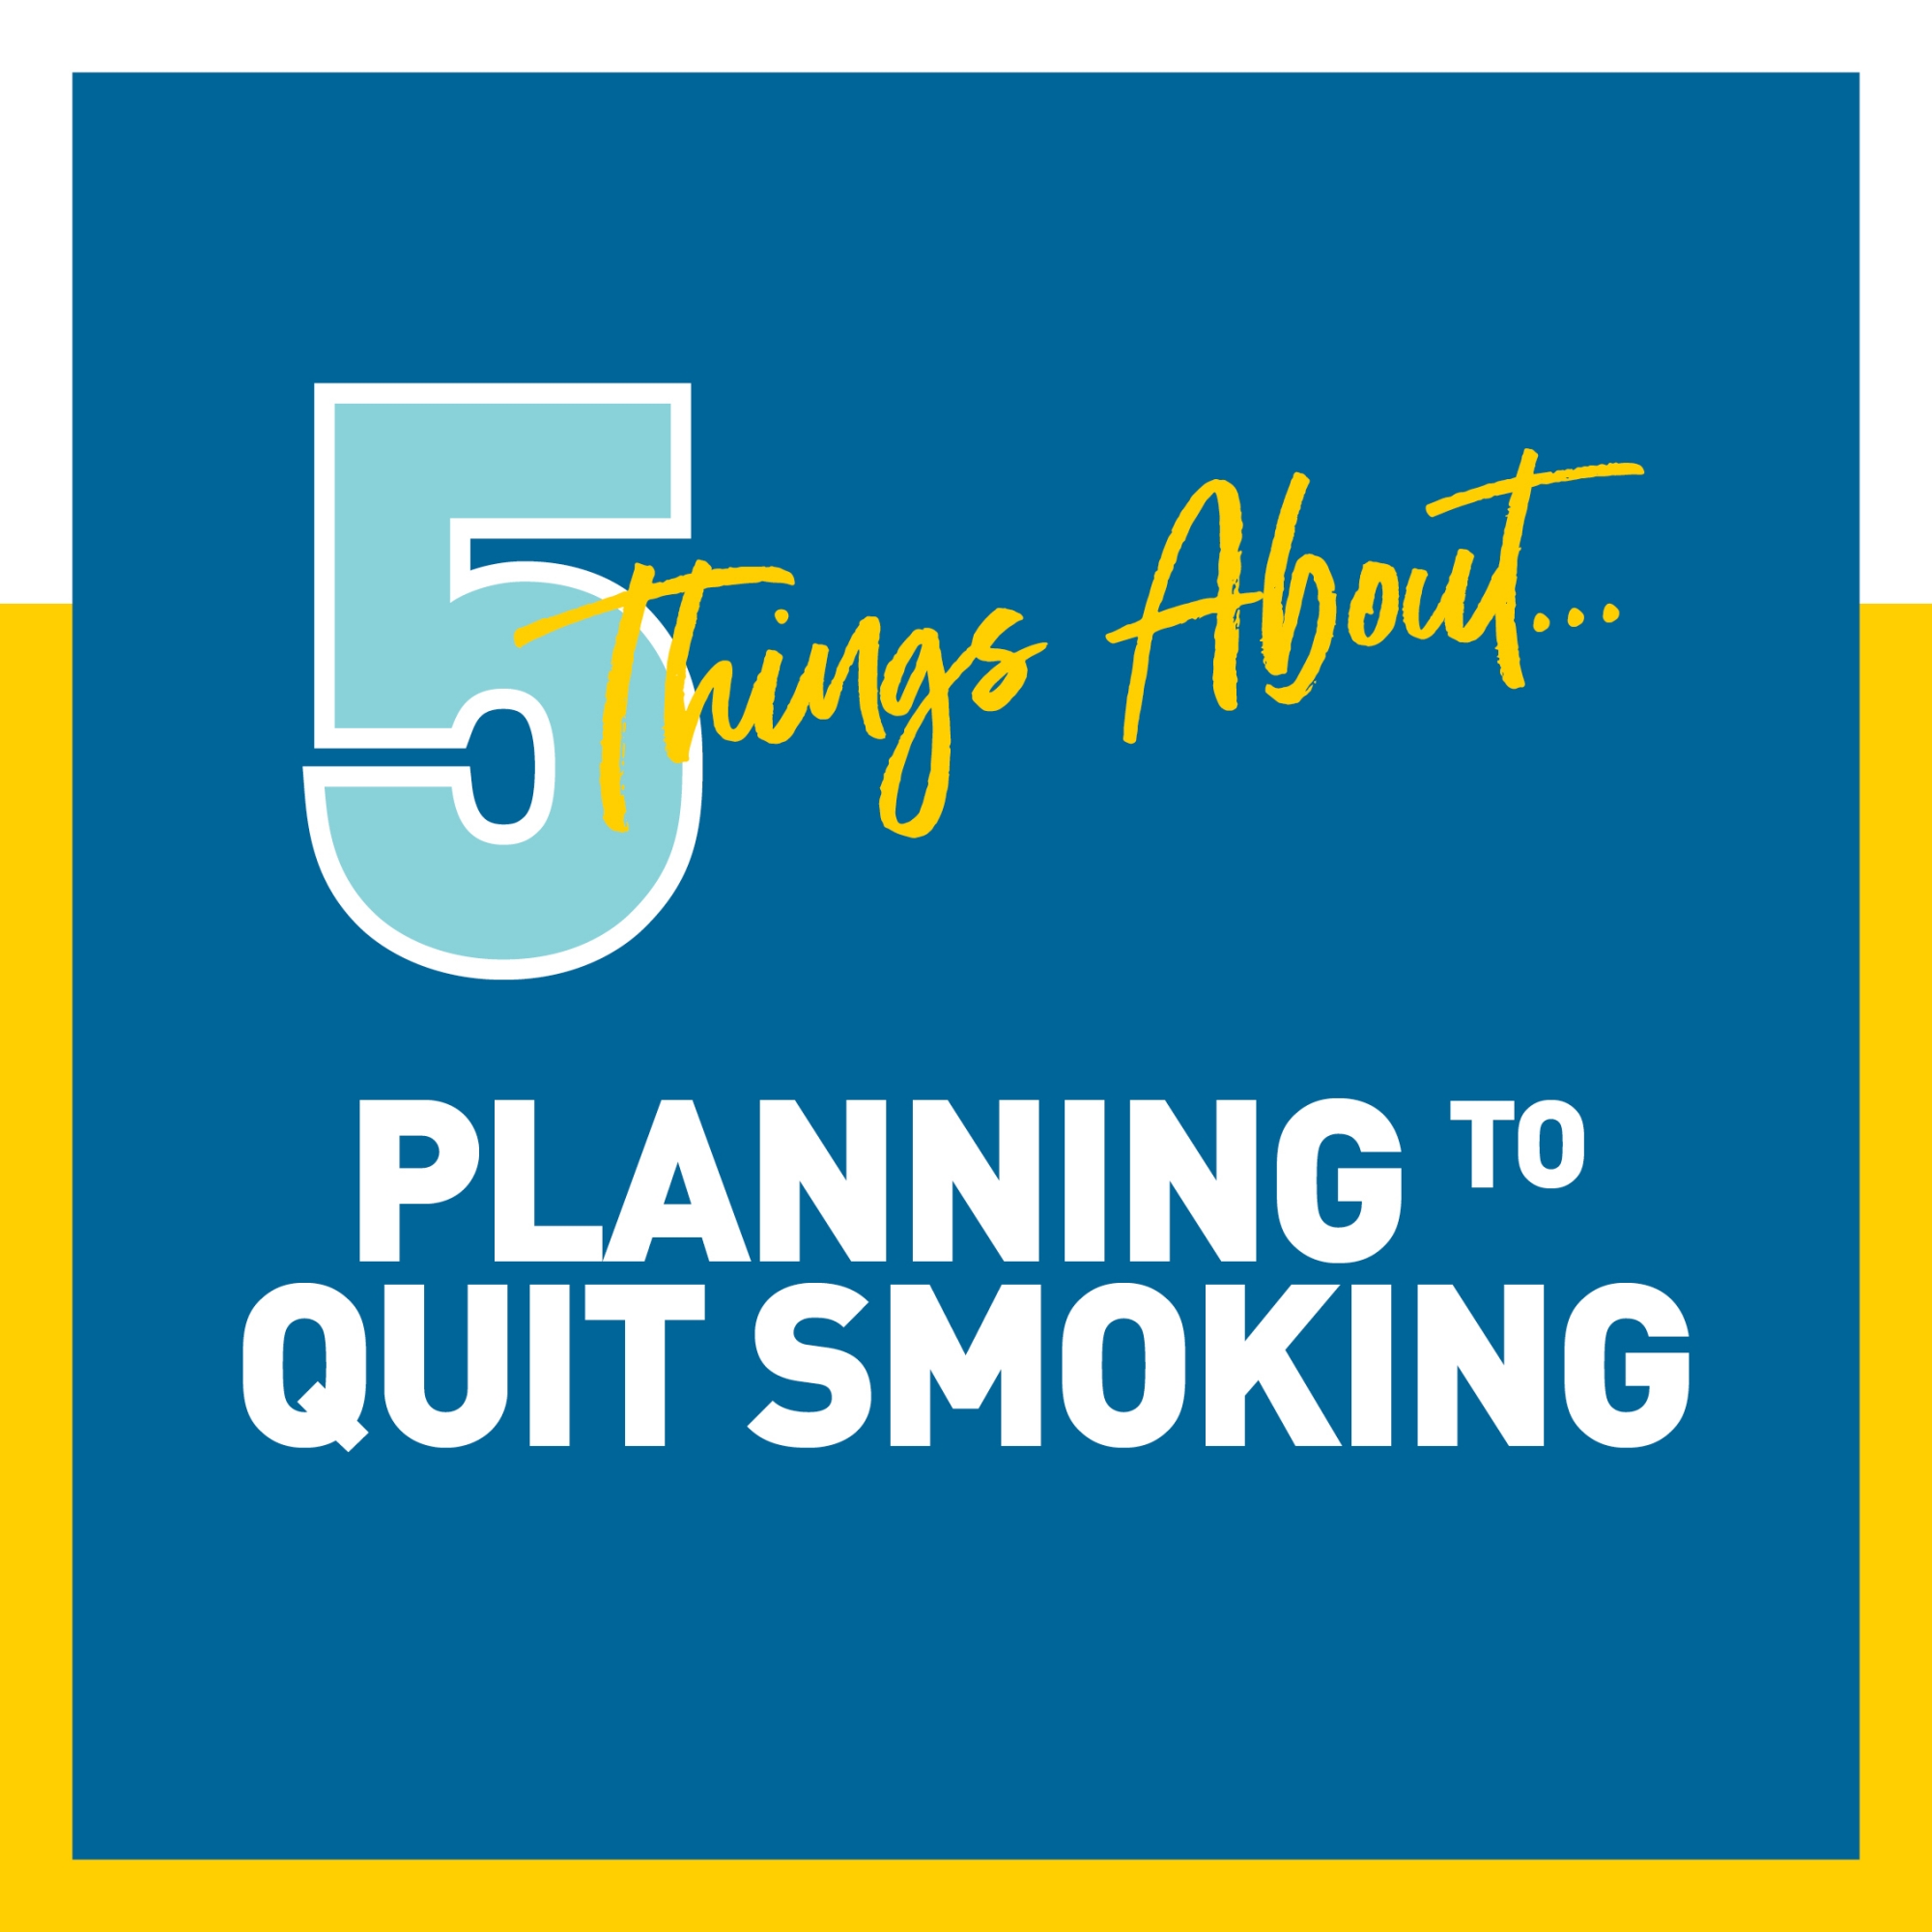 5 Things About Planning to Quit Smoking